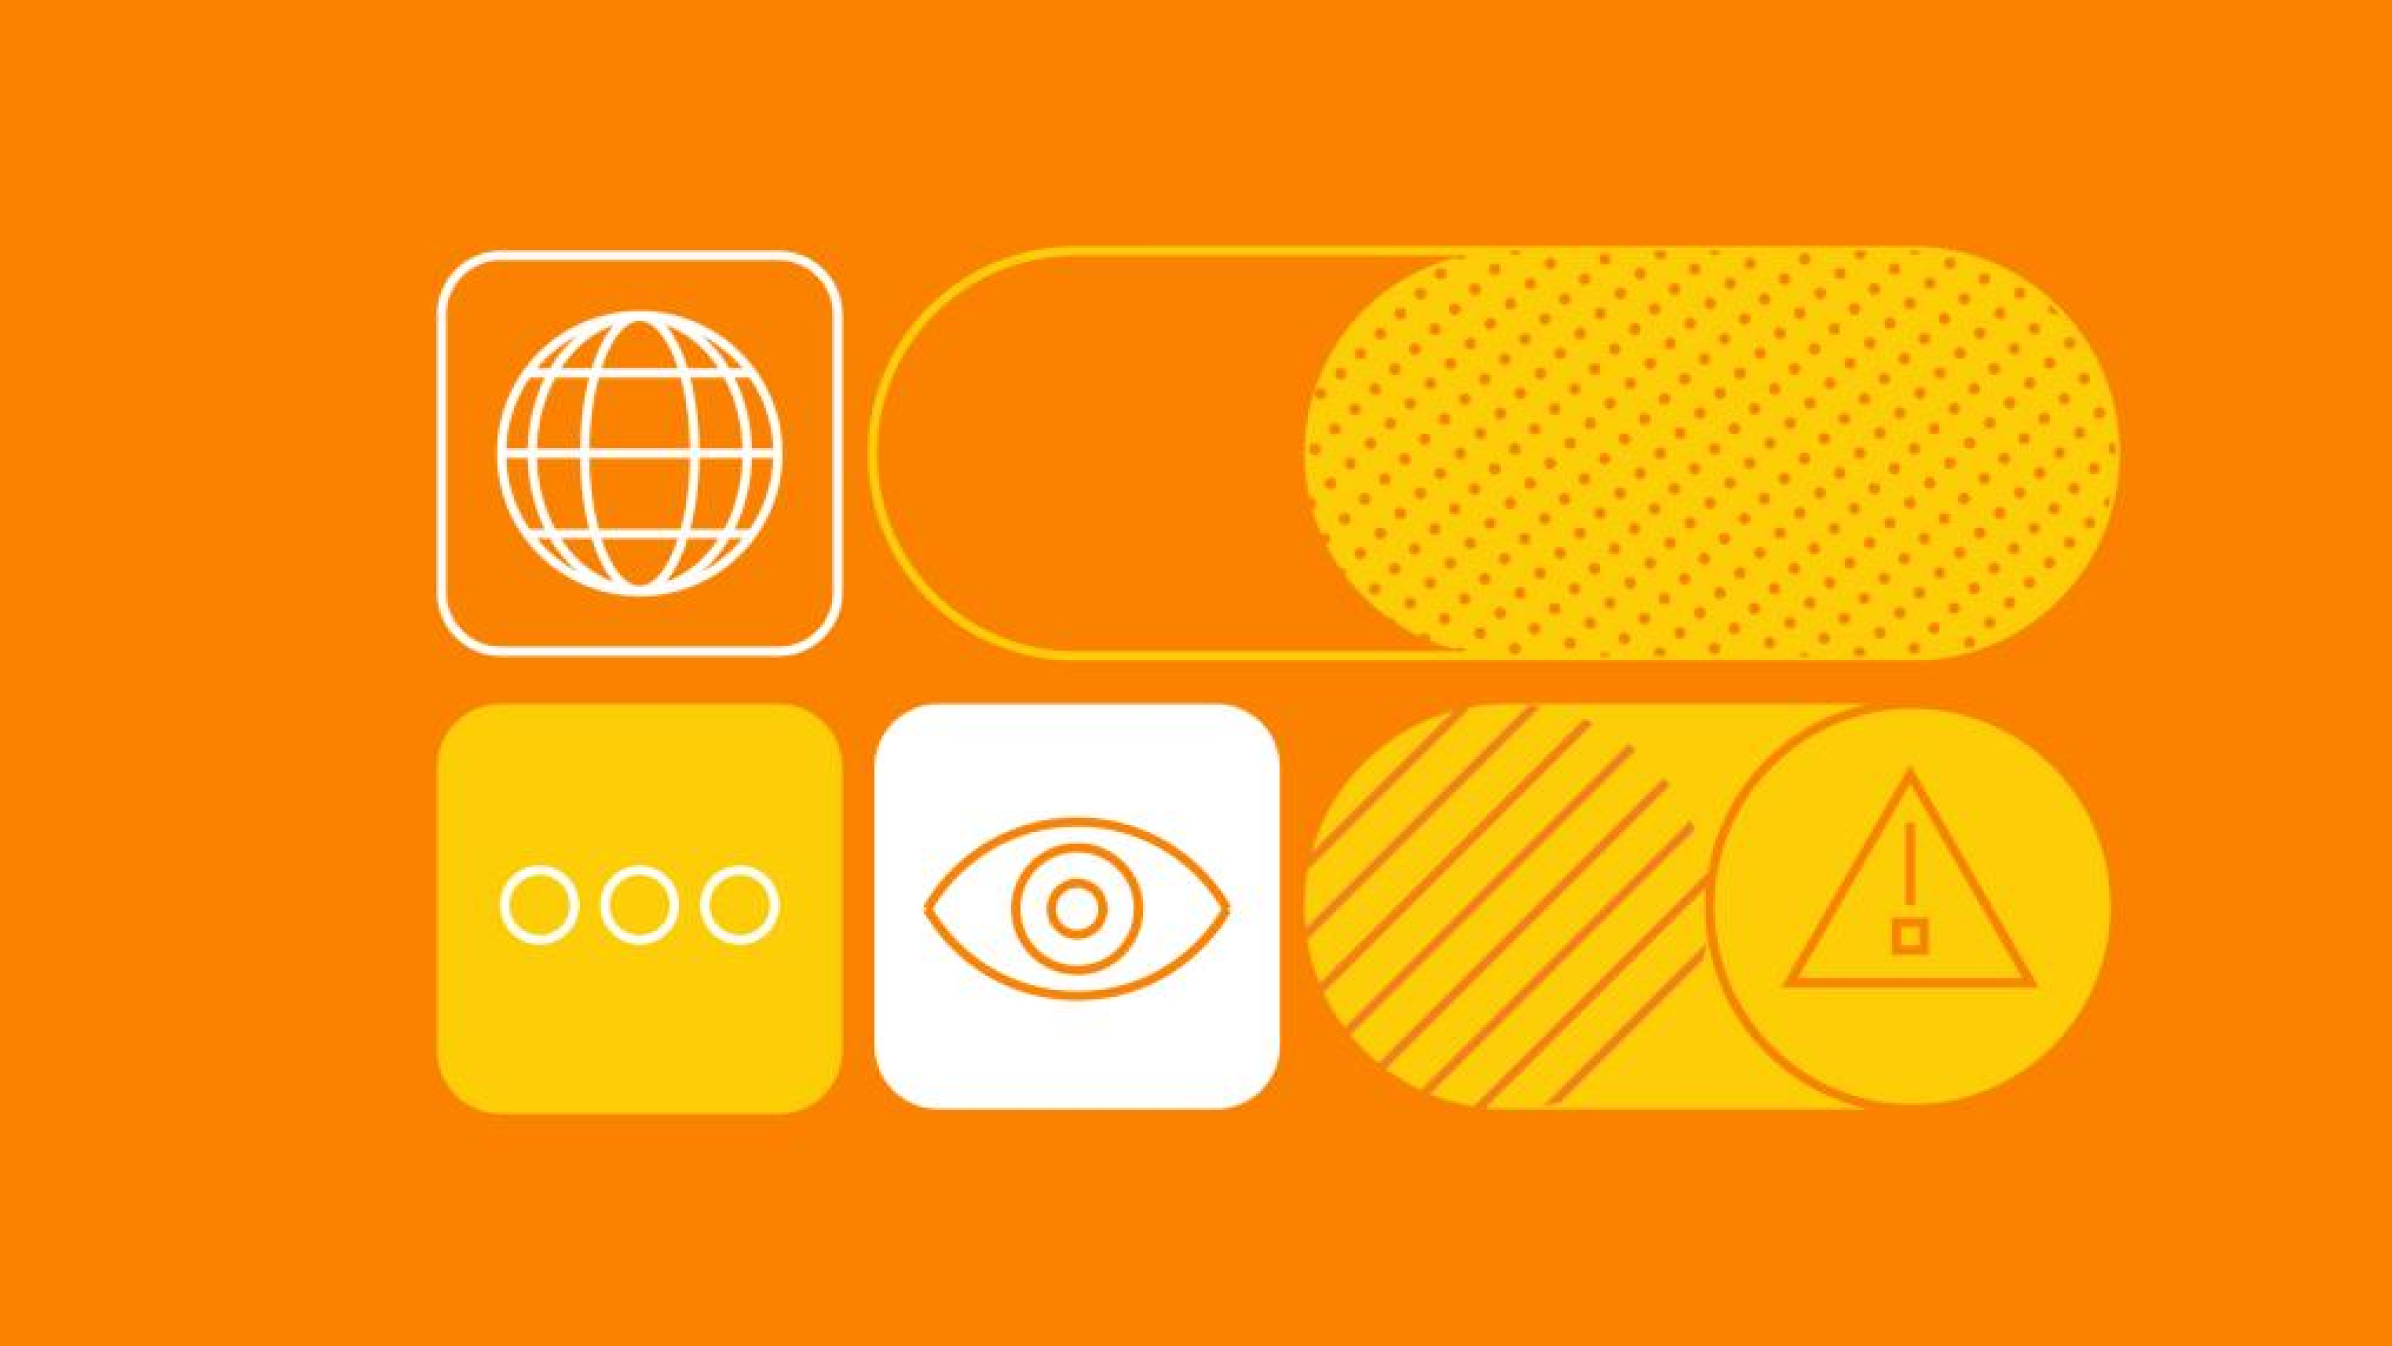 Yellow patterns and symbols against an orange background.